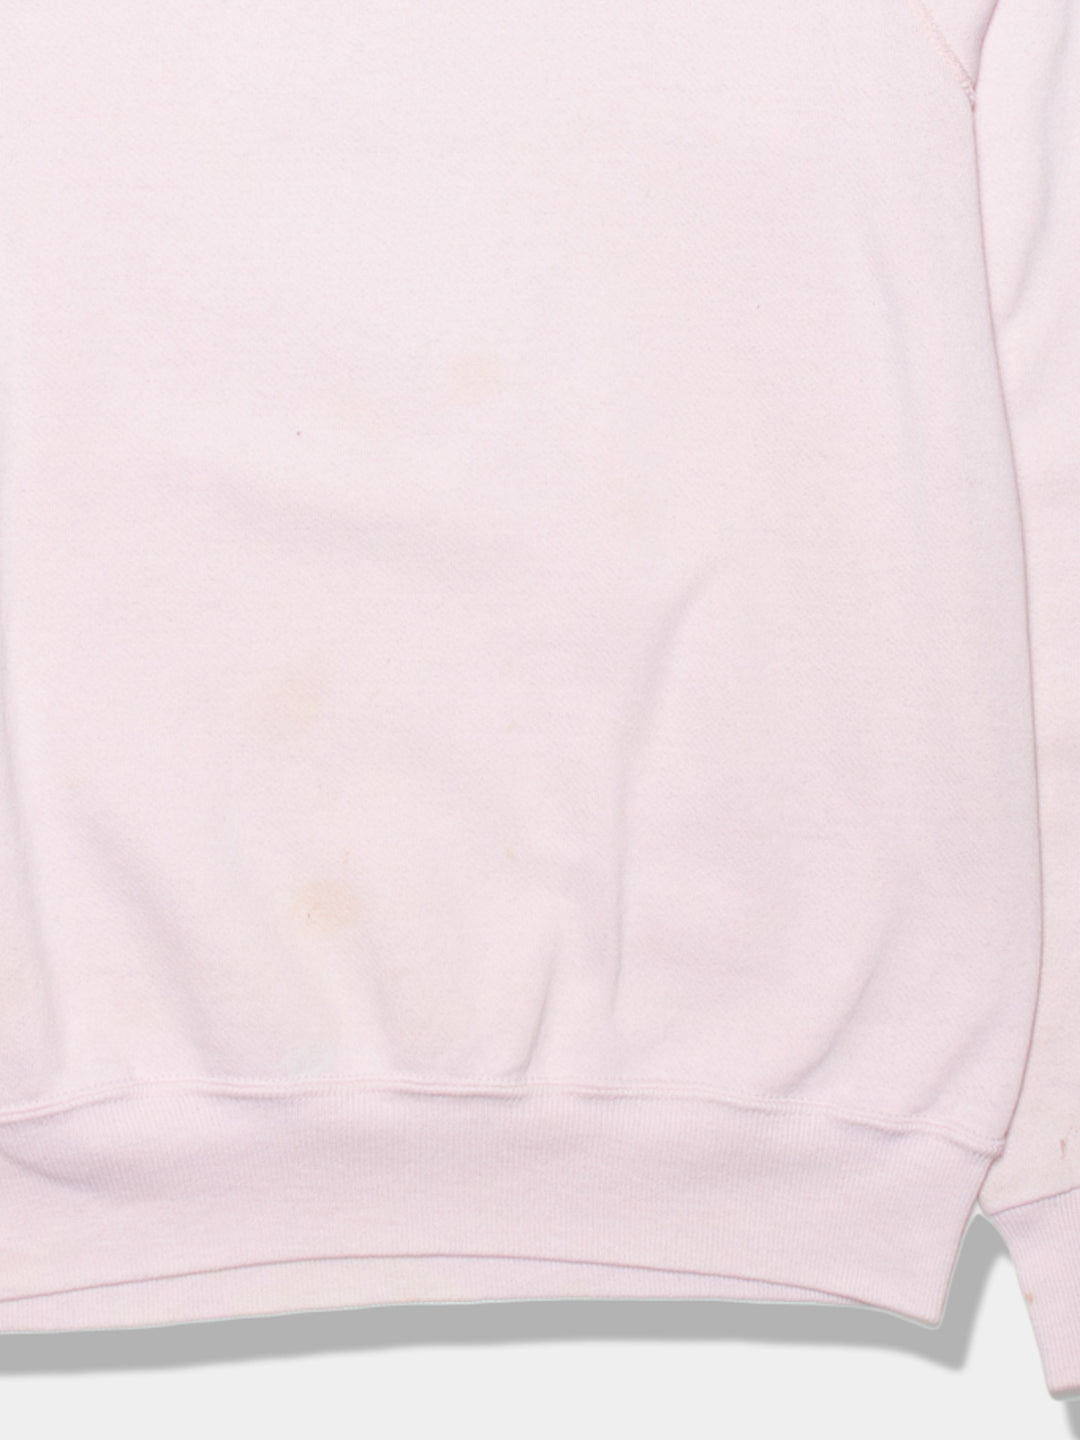 90s Nike Pink Embroidered Sweat (Ladies M)